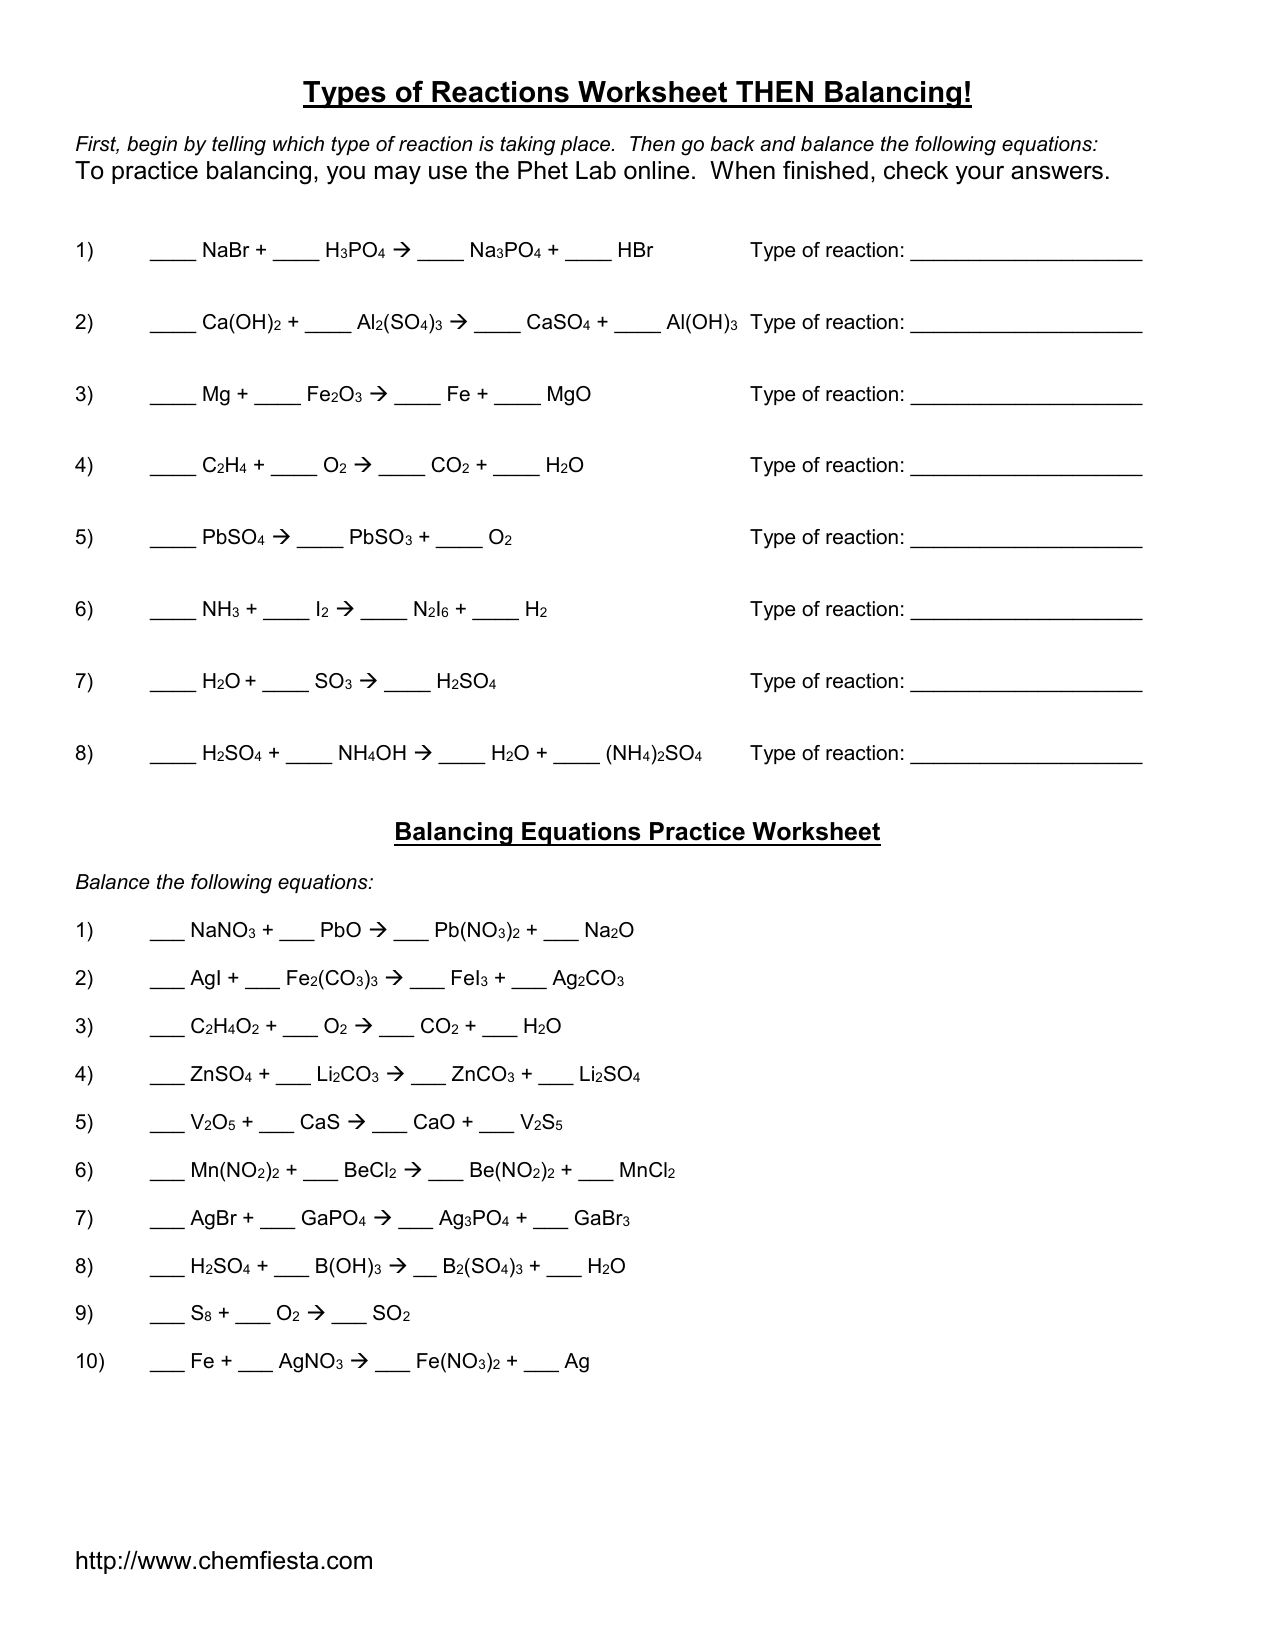 Balancing Equations Practice Worksheet For Types Of Reactions Worksheet Answers